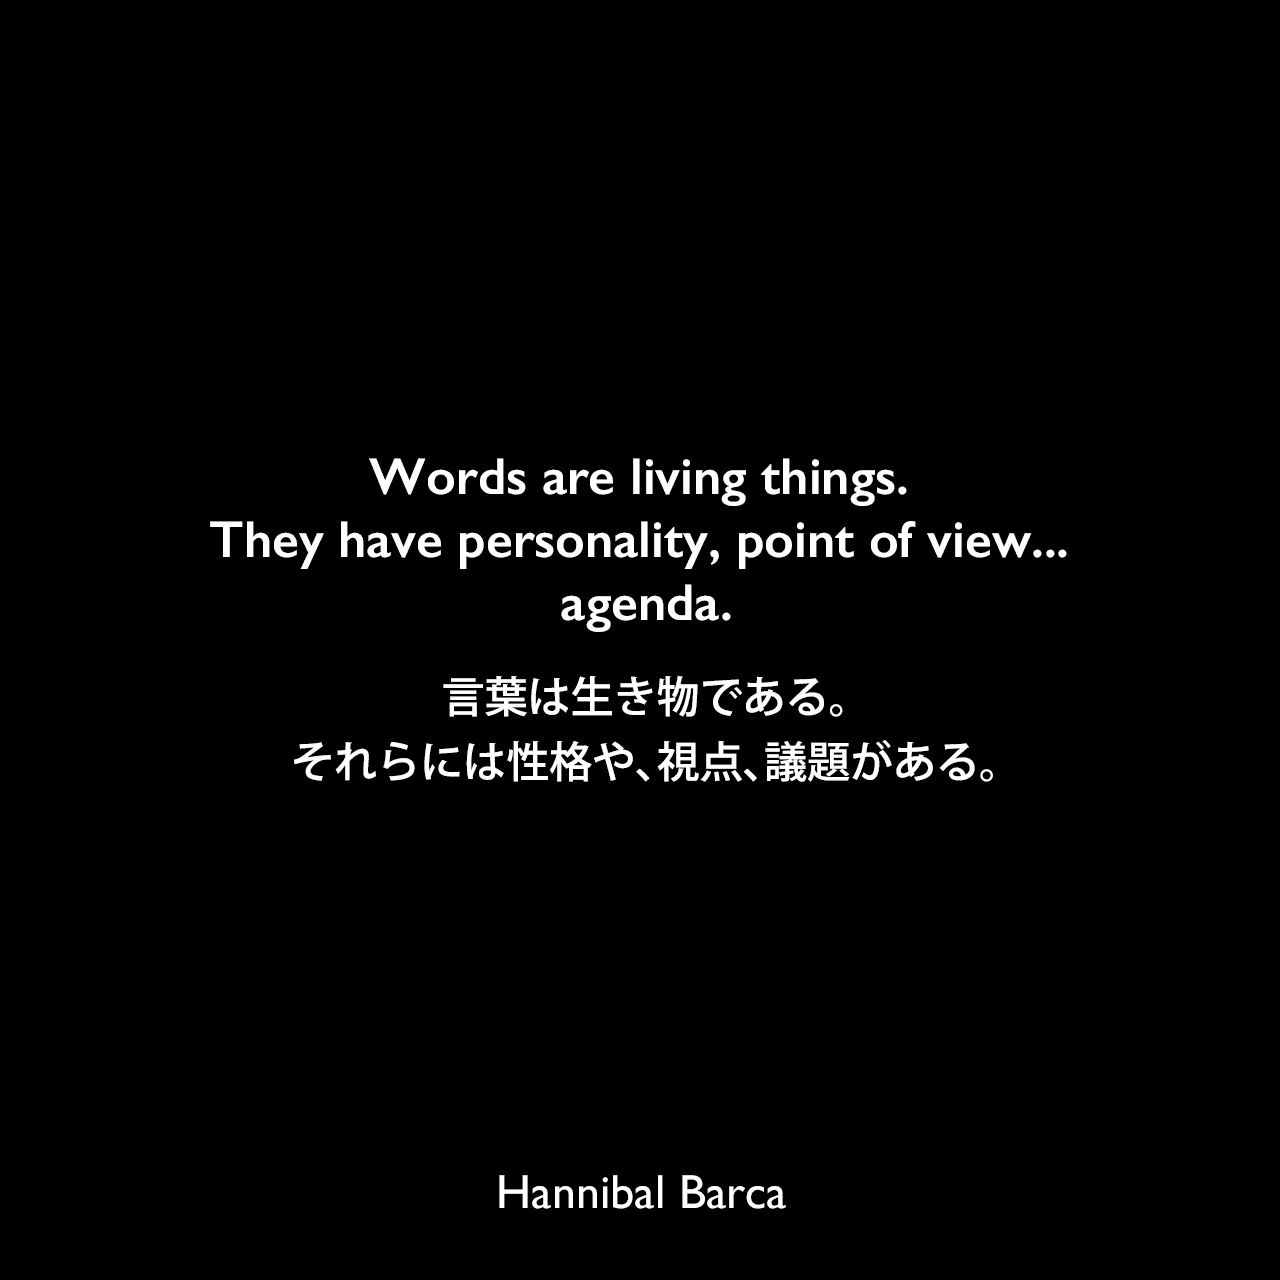 Words are living things. They have personality, point of view... agenda.言葉は生き物である。それらには性格や、視点、議題がある。Hannibal Barca